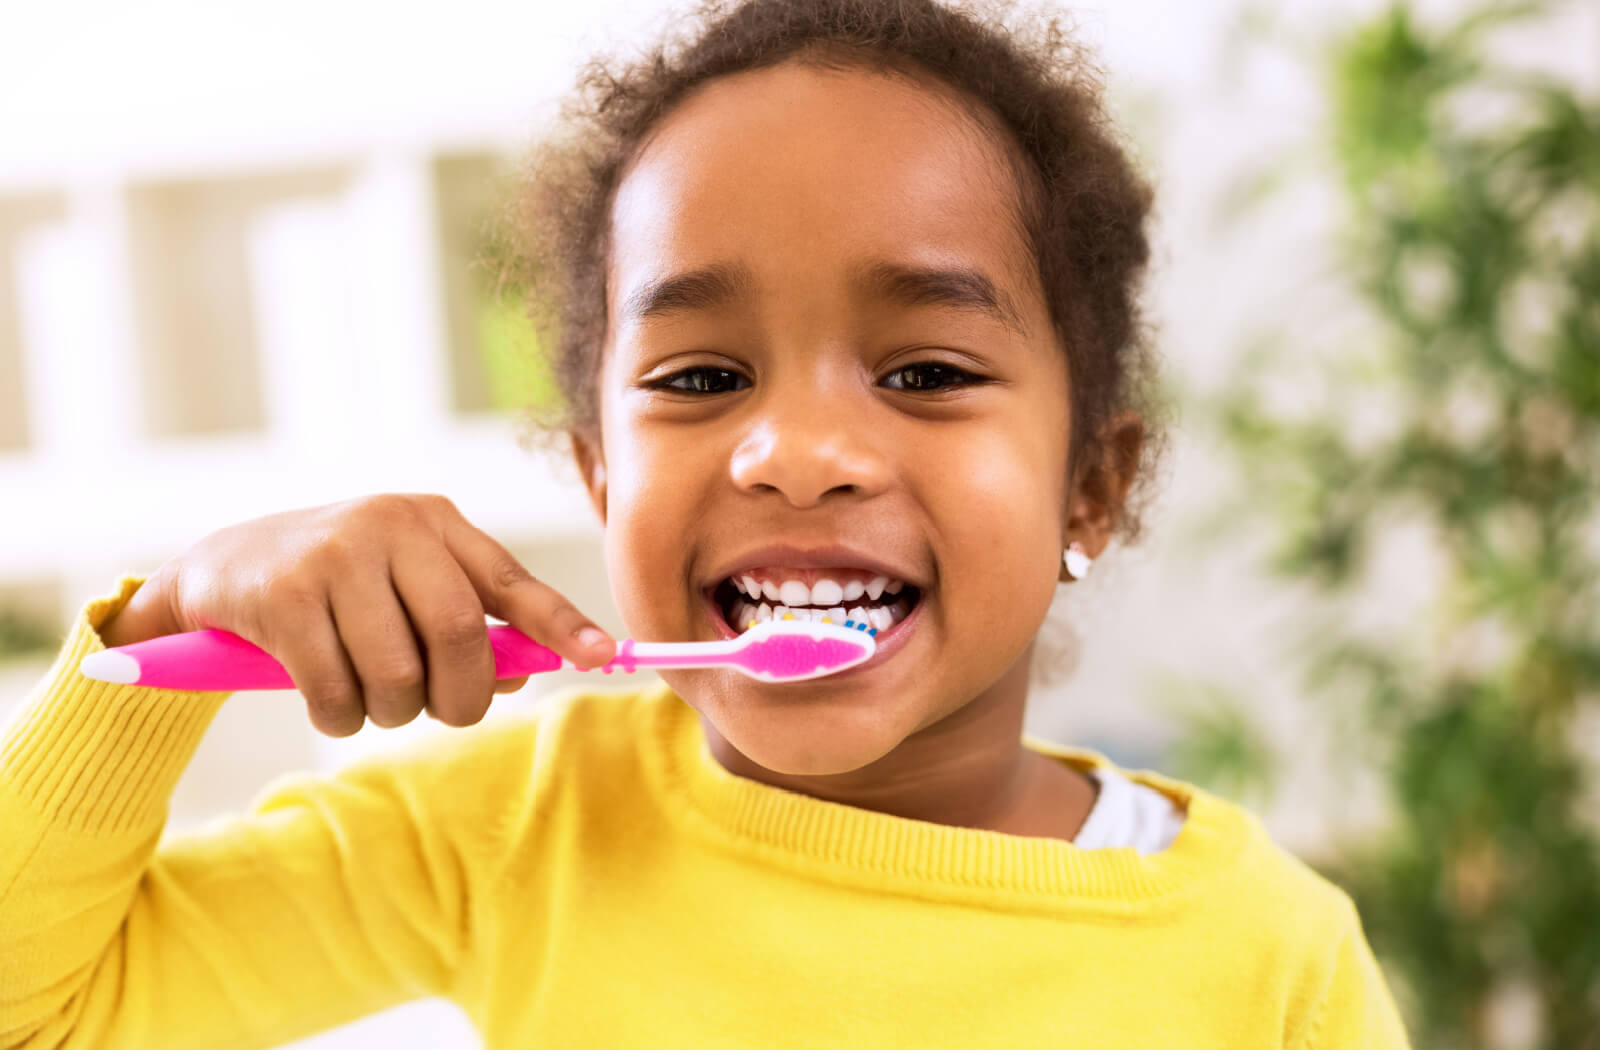 A young girl brushing her teeth using a pink toothbrush.